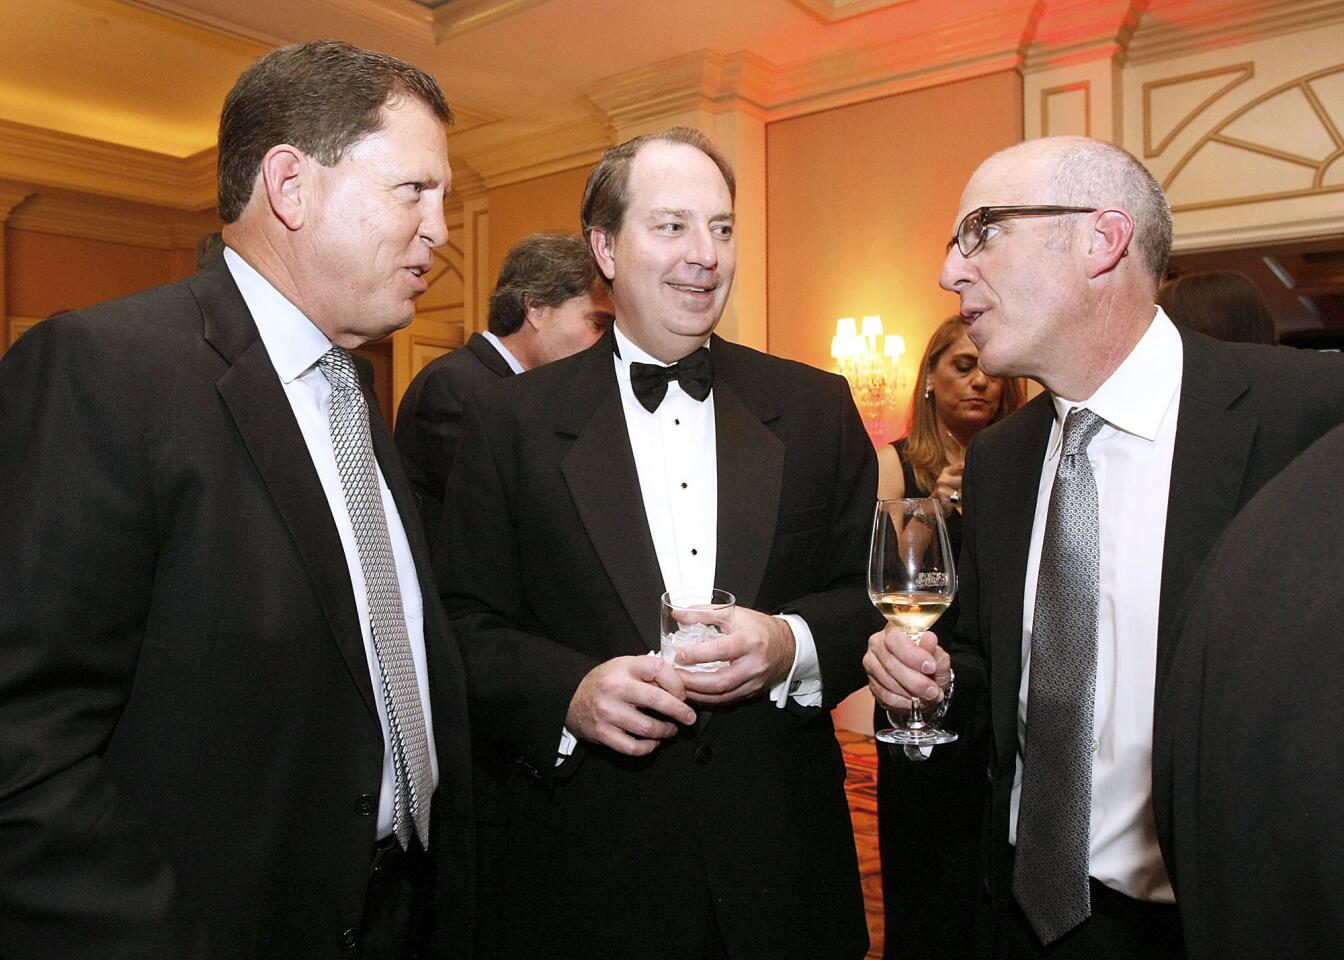 La Canada Flintridge mayor Stephen Del Guercio, center, talks with Chris Myers, left, and John Ricce, right, at the La Canada Flintridge Educational Foundation's Spring Gala at the Langham Huntington Hotel in Pasadena on Saturday, March 9, 2013. Del Guercio received the Spirit of Outstanding Service award at the event.